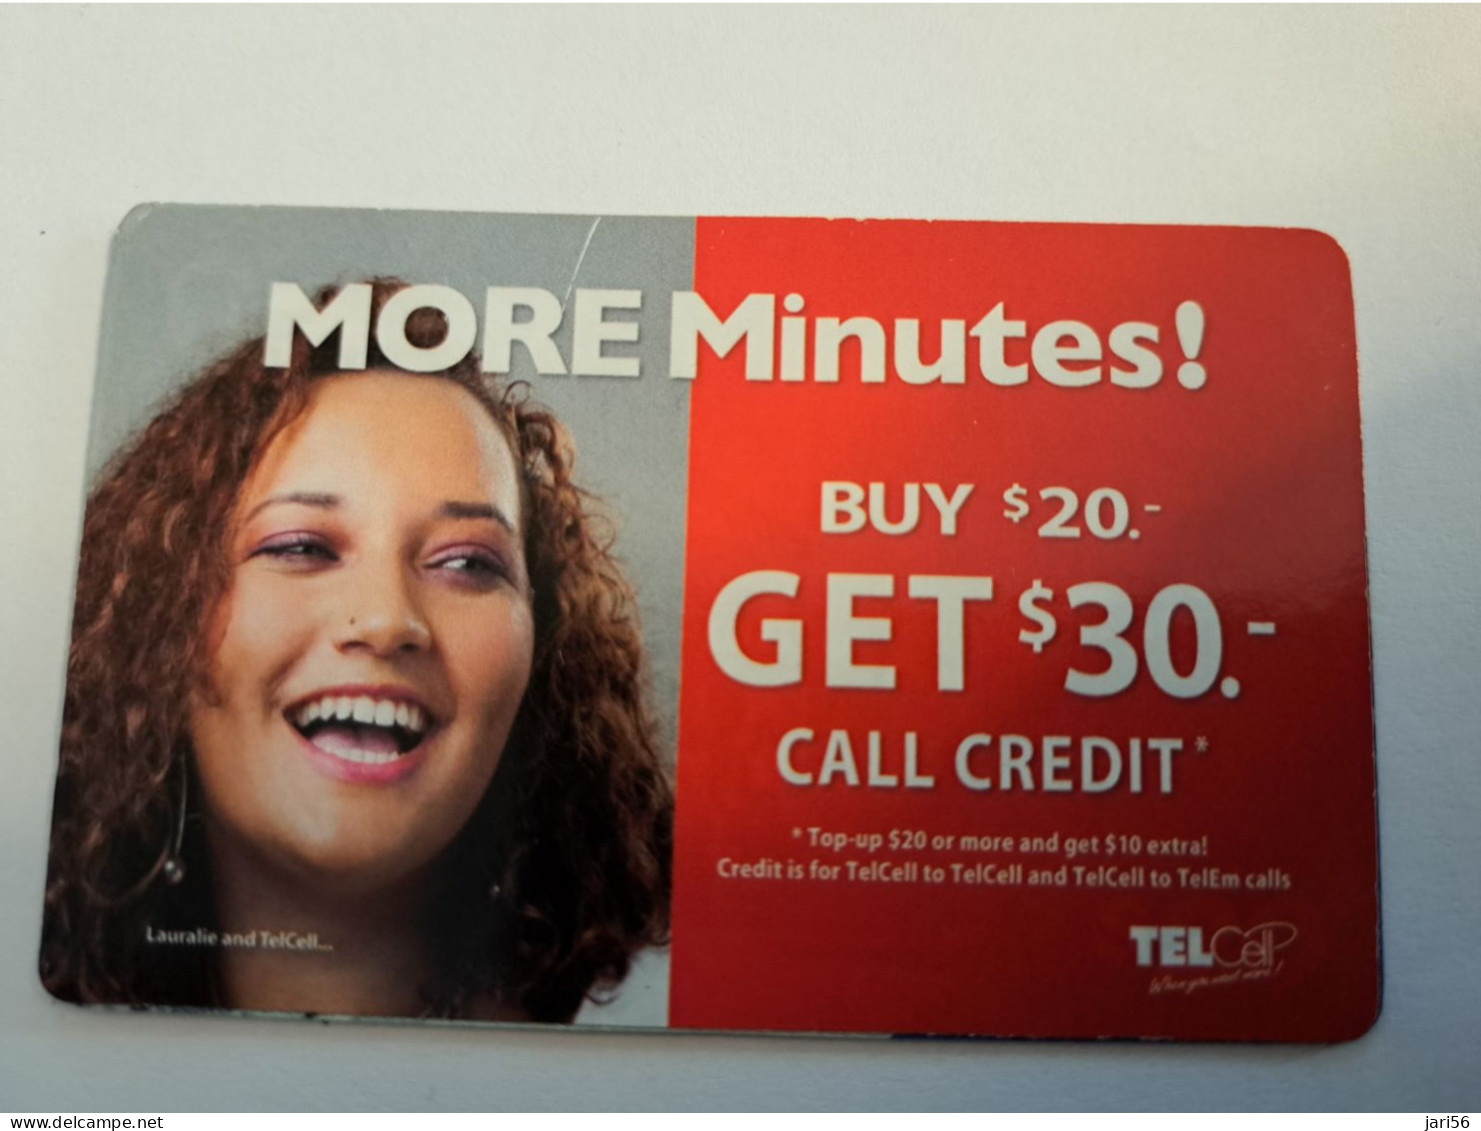 St MAARTEN  Prepaid  $20,-= # 30,-  / TELCELL/ MORE MINUTES/ OVERPRINT !!   Fine Used Card  **16211** - Antilles (Netherlands)